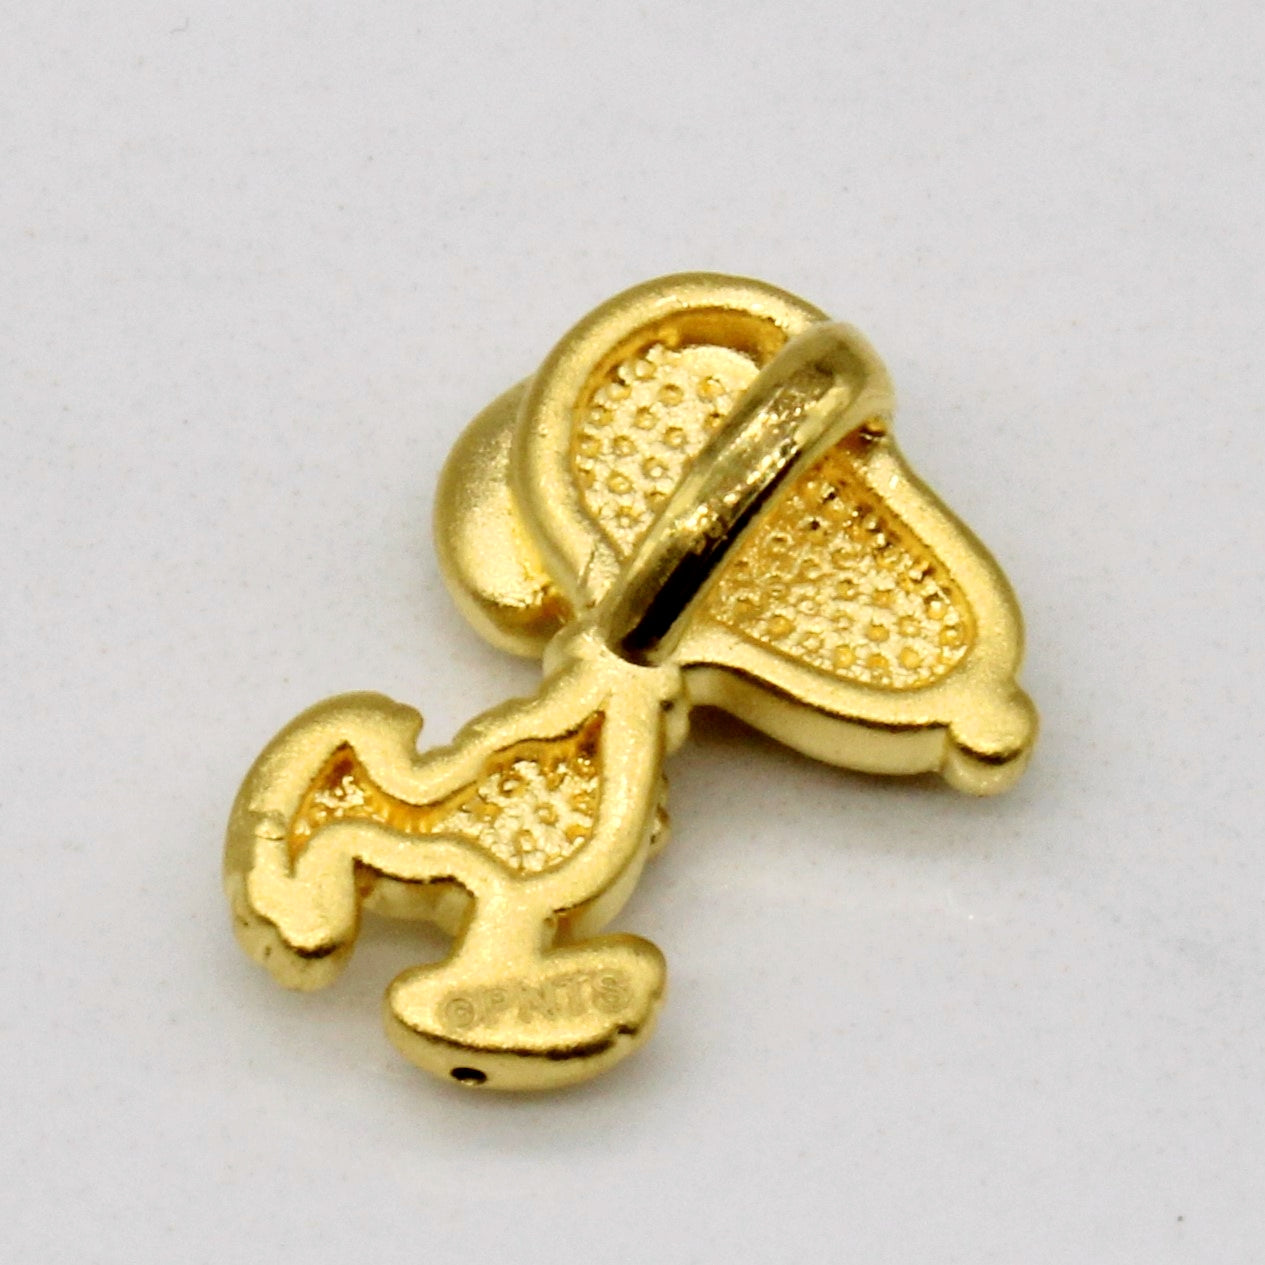 24k Yellow Gold Snoopy Charm